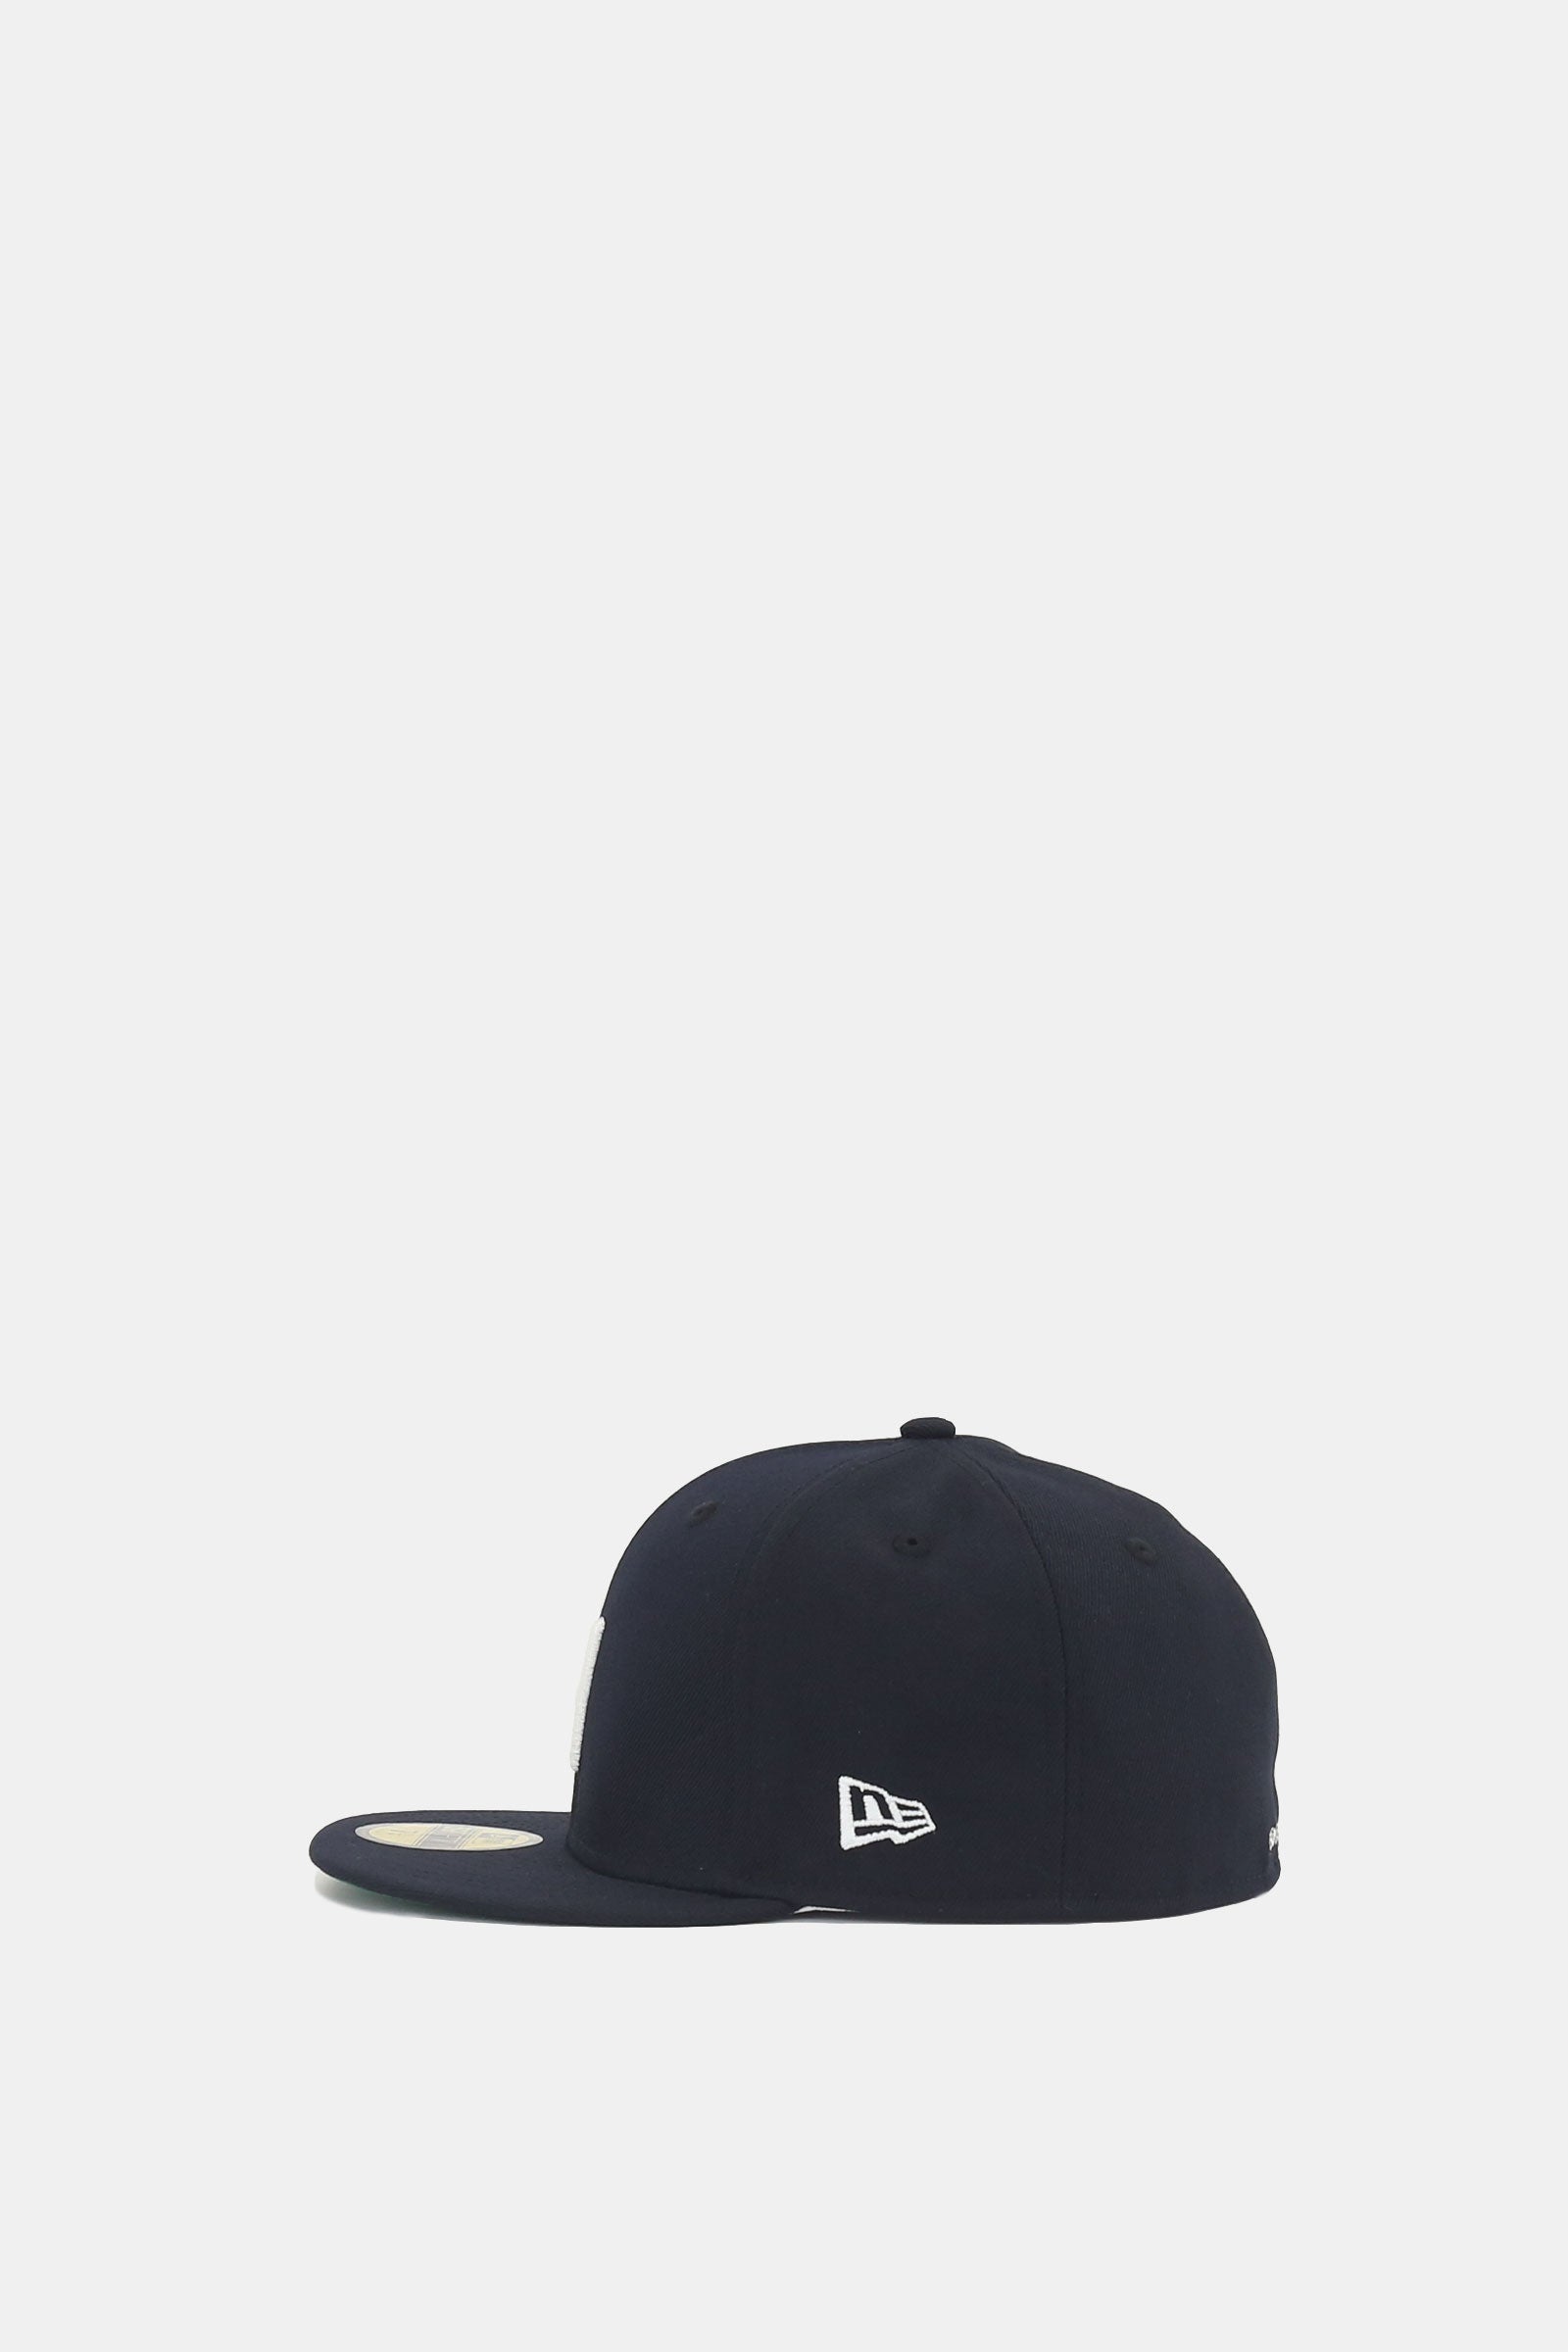 HOMEBRED H NEW ERA 59FIFTY FITTED